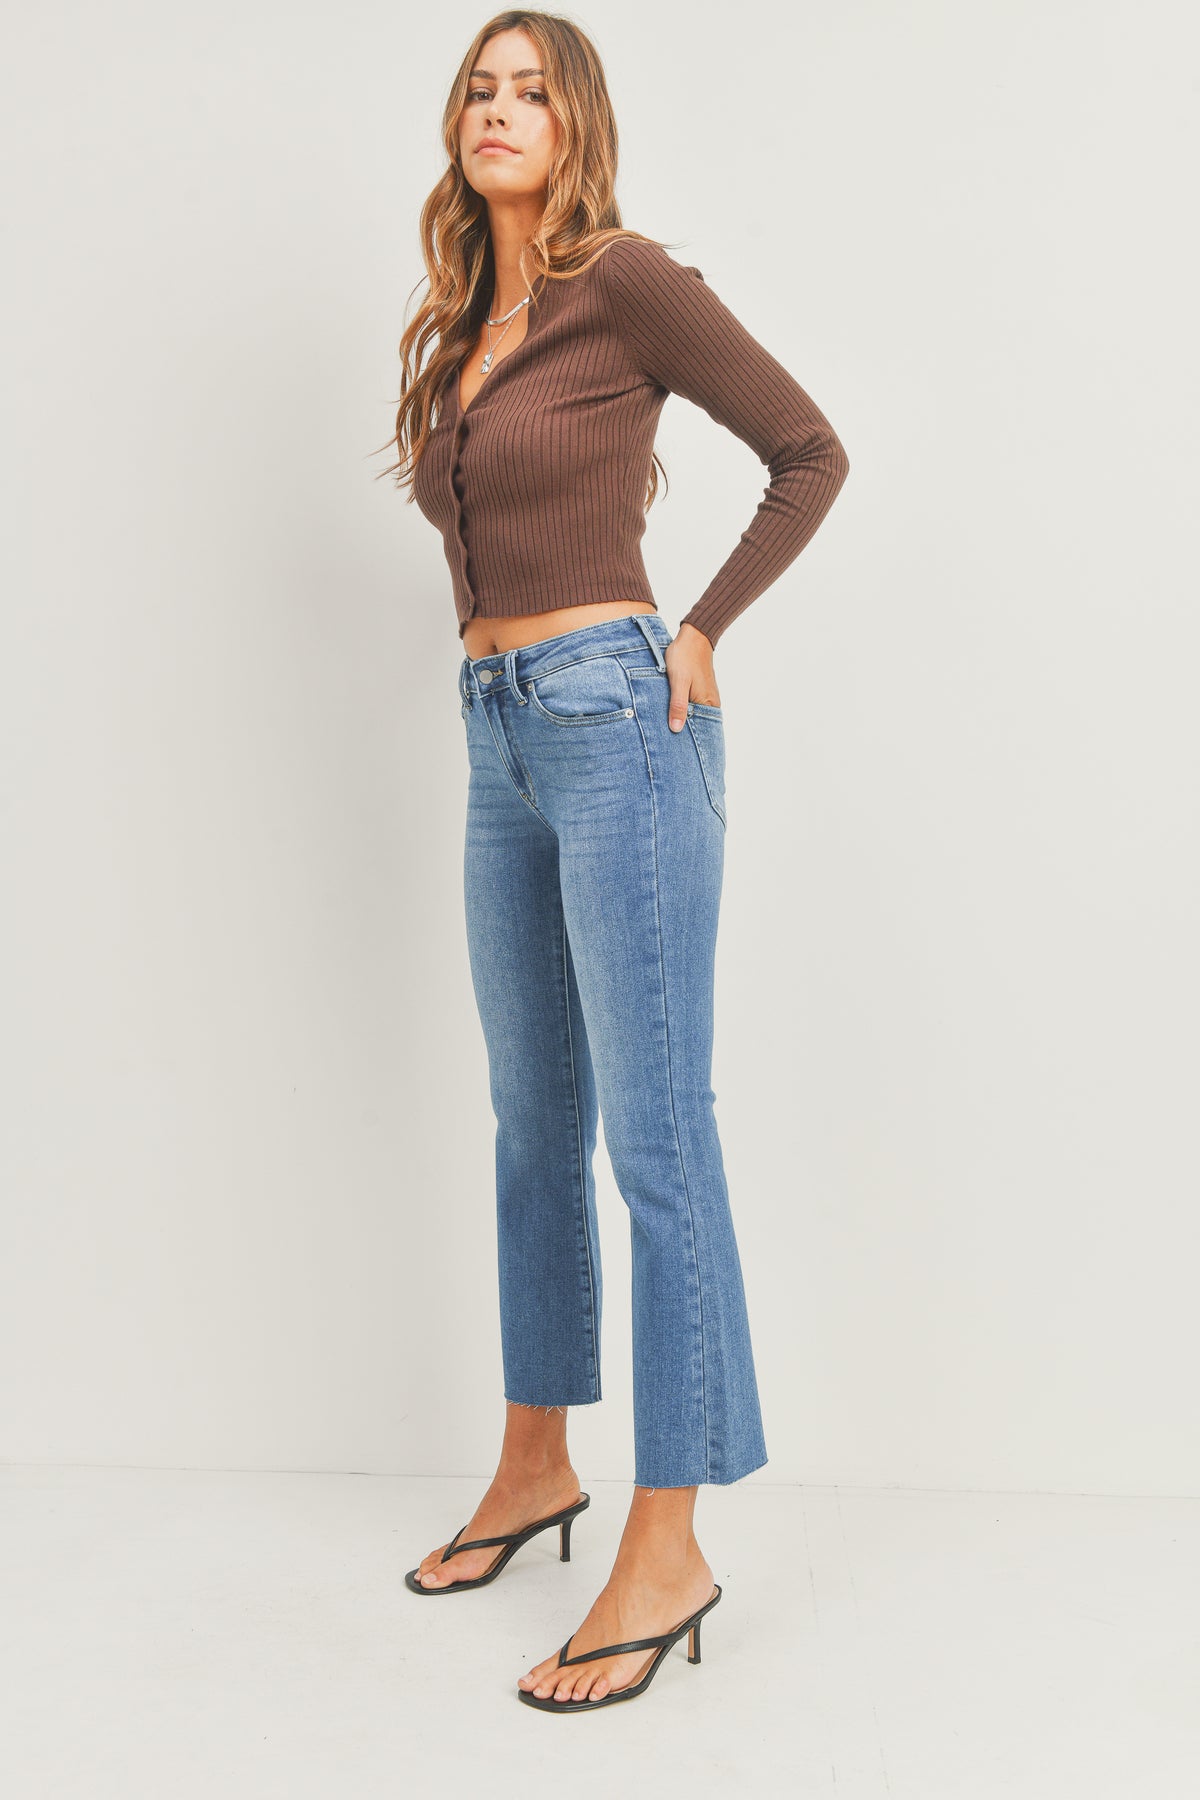 Just Black Denim | Cropped Flare Jeans for Women | Sweetest Stitch